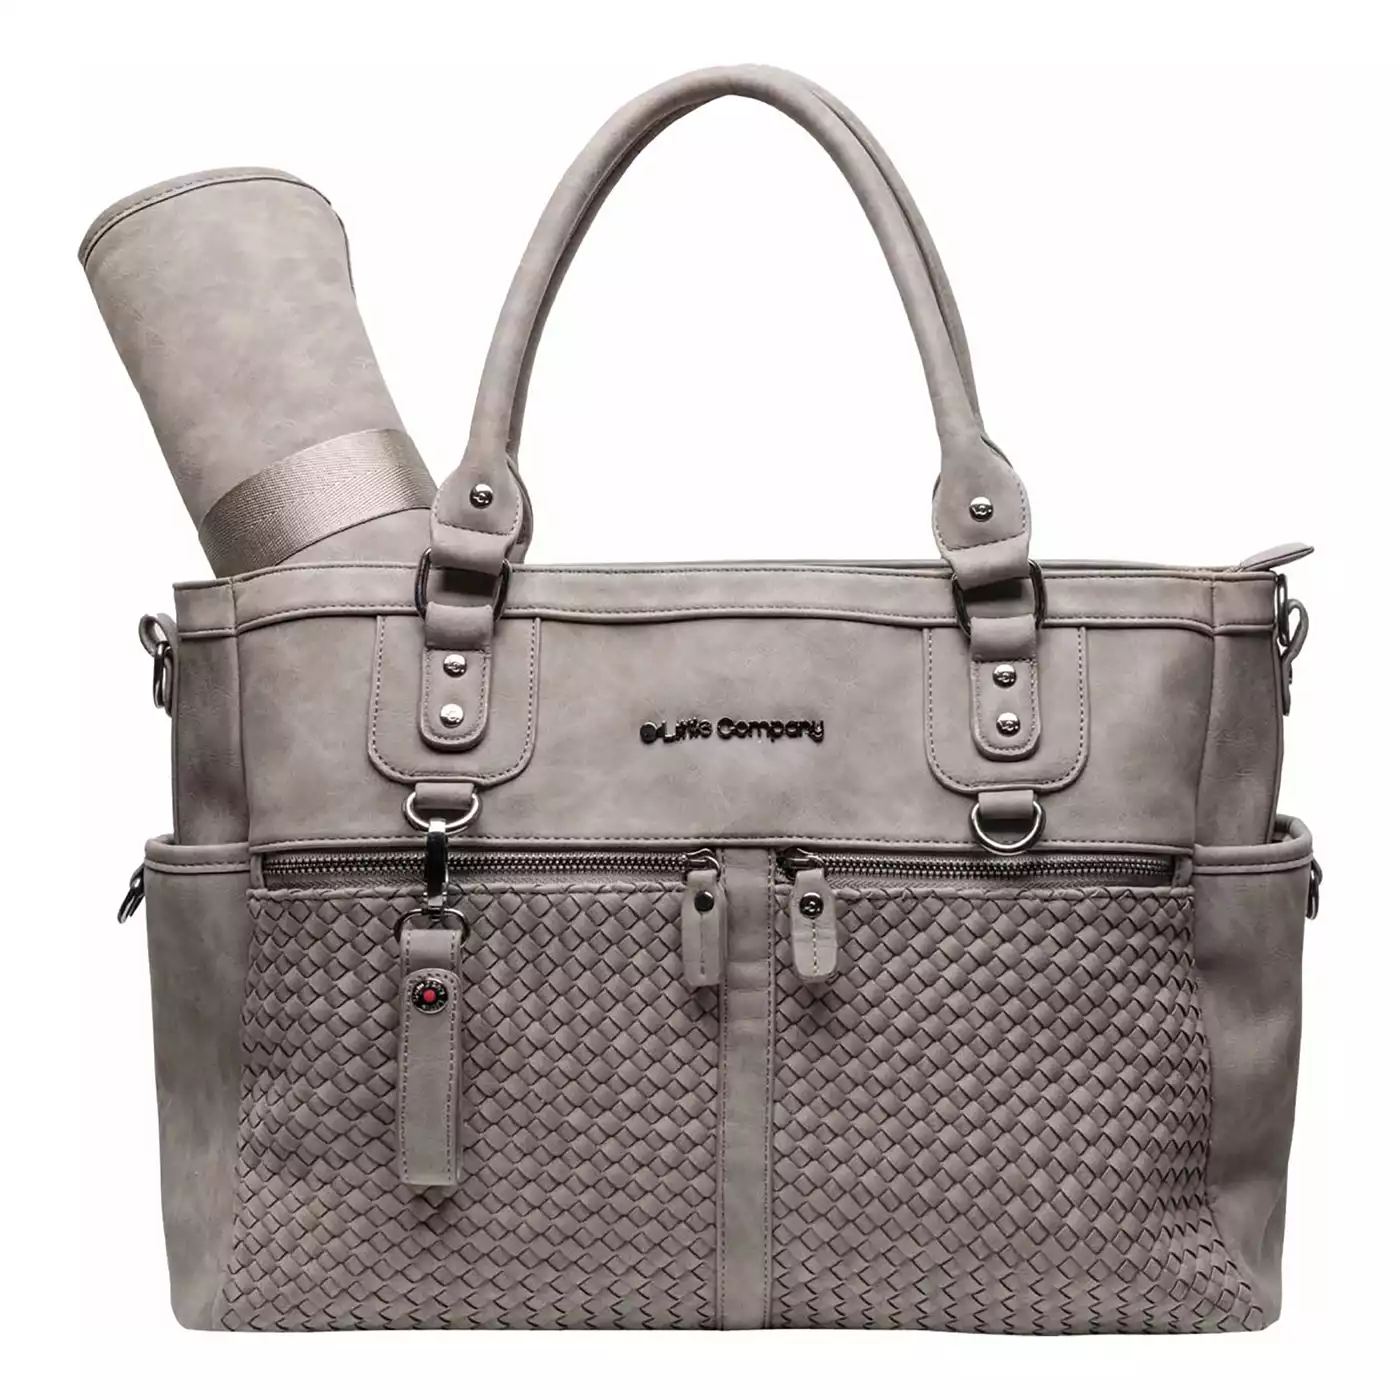 Wickeltasche Monaco Braided taupe Little Company Grau Taupe 2000576181262 7